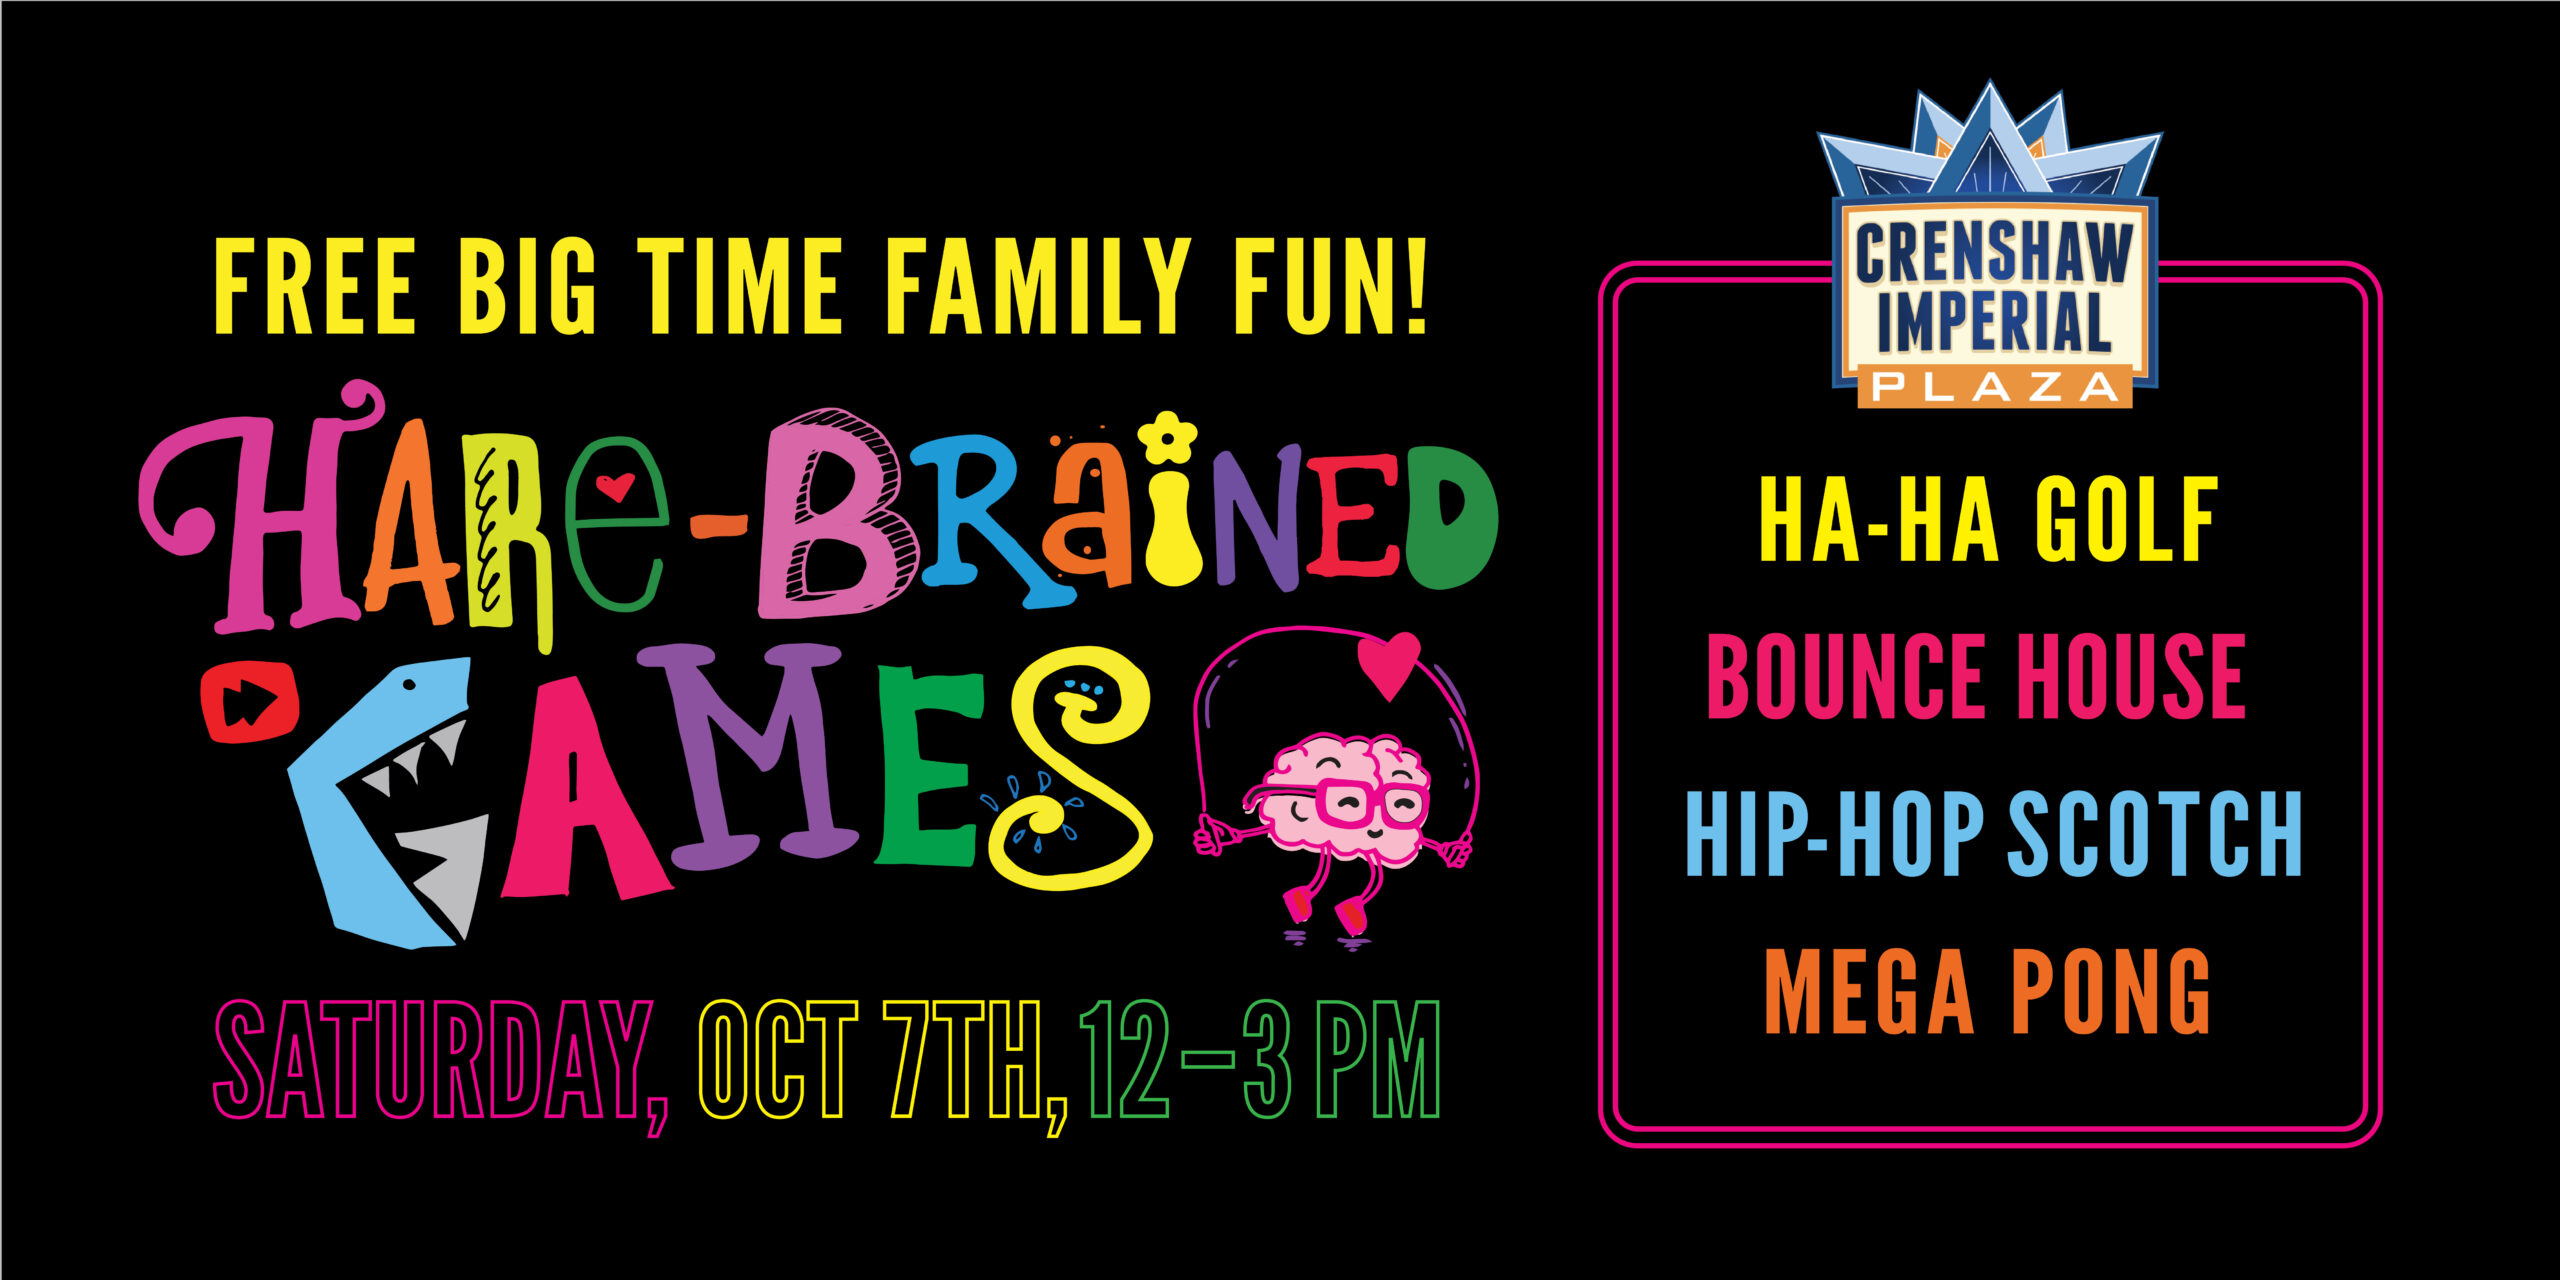 Hare-Brained Games at Crenshaw Imperial Plaza | Crenshaw Imperial Plaza